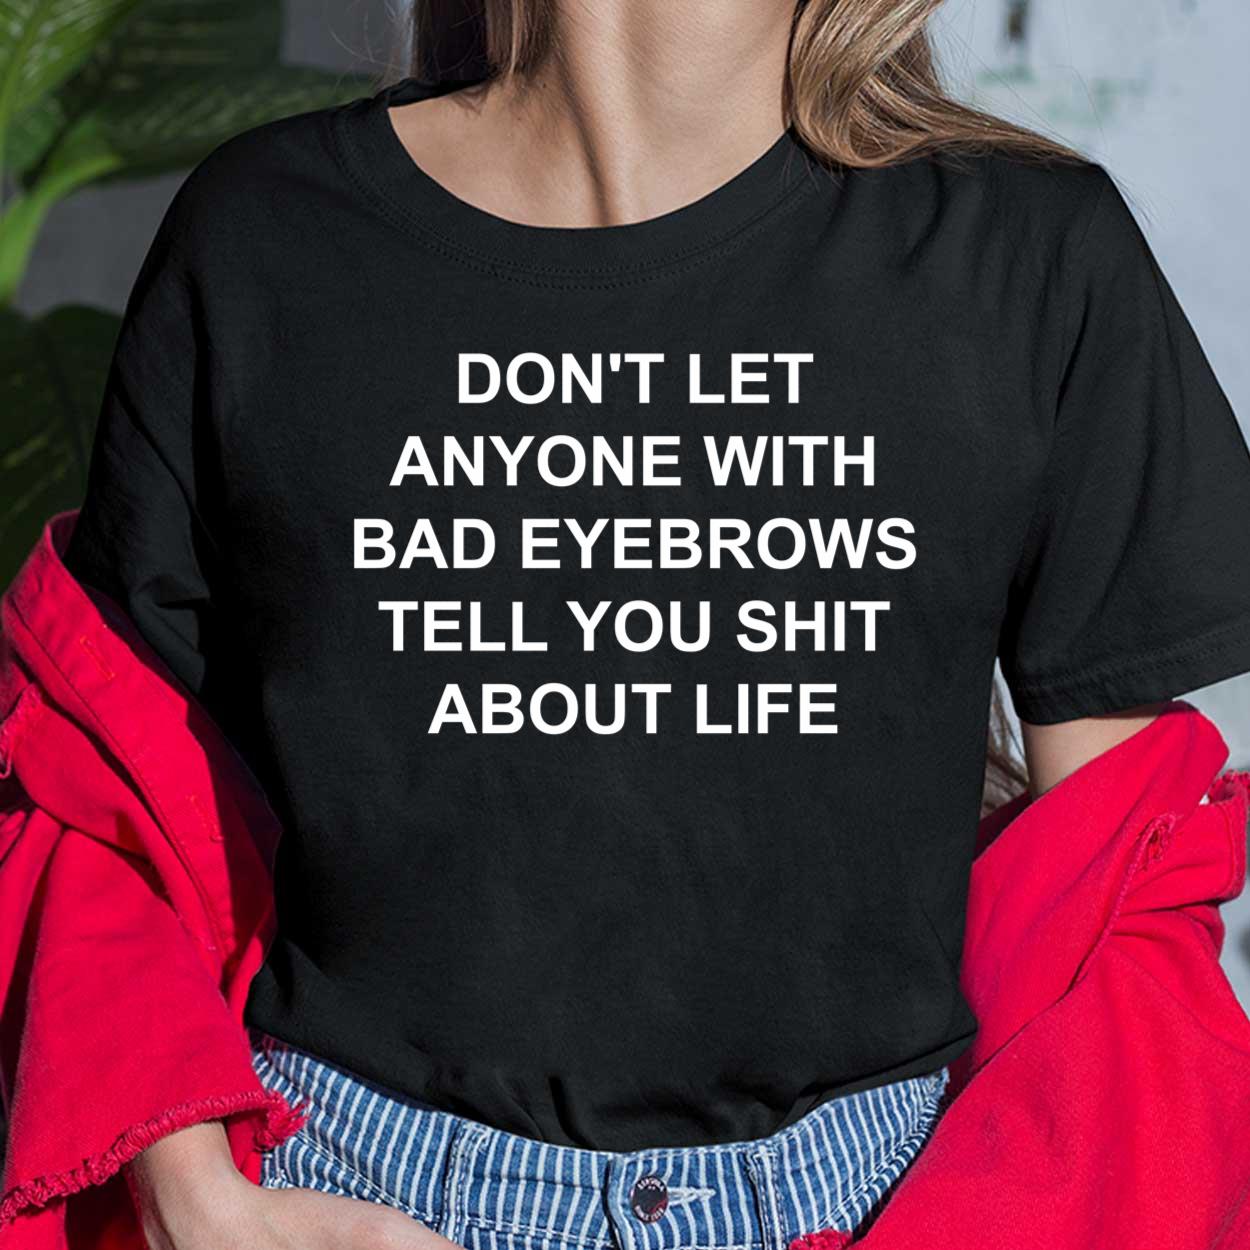 Don't Let Anyone With Bad Eyebrows Tell You Sh*t About Life Shirt ...